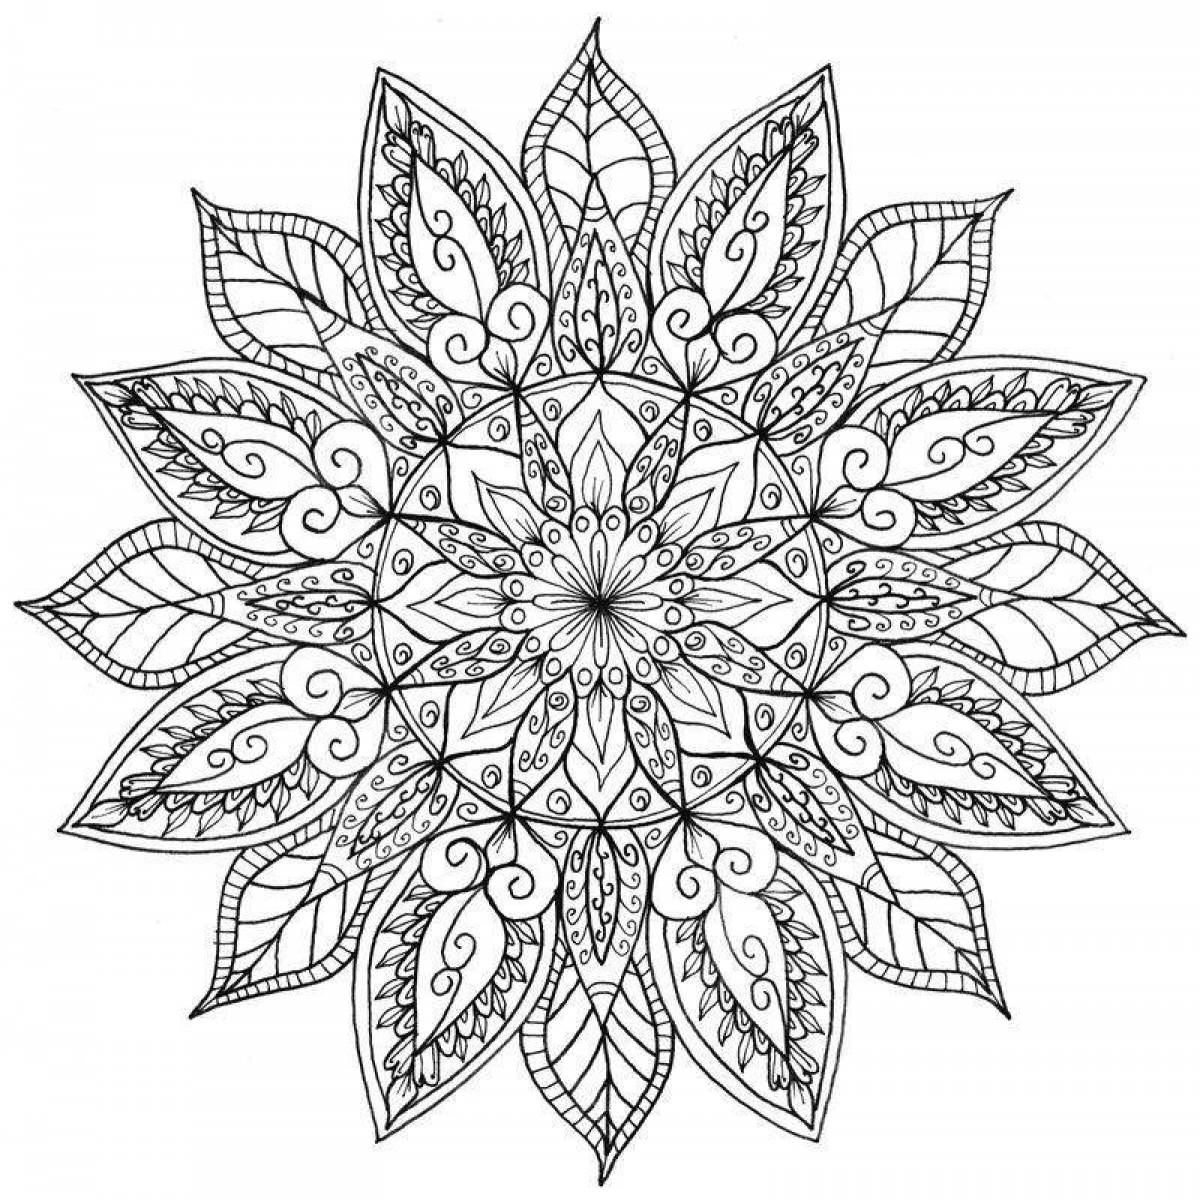 Exquisite mandala coloring book for adults